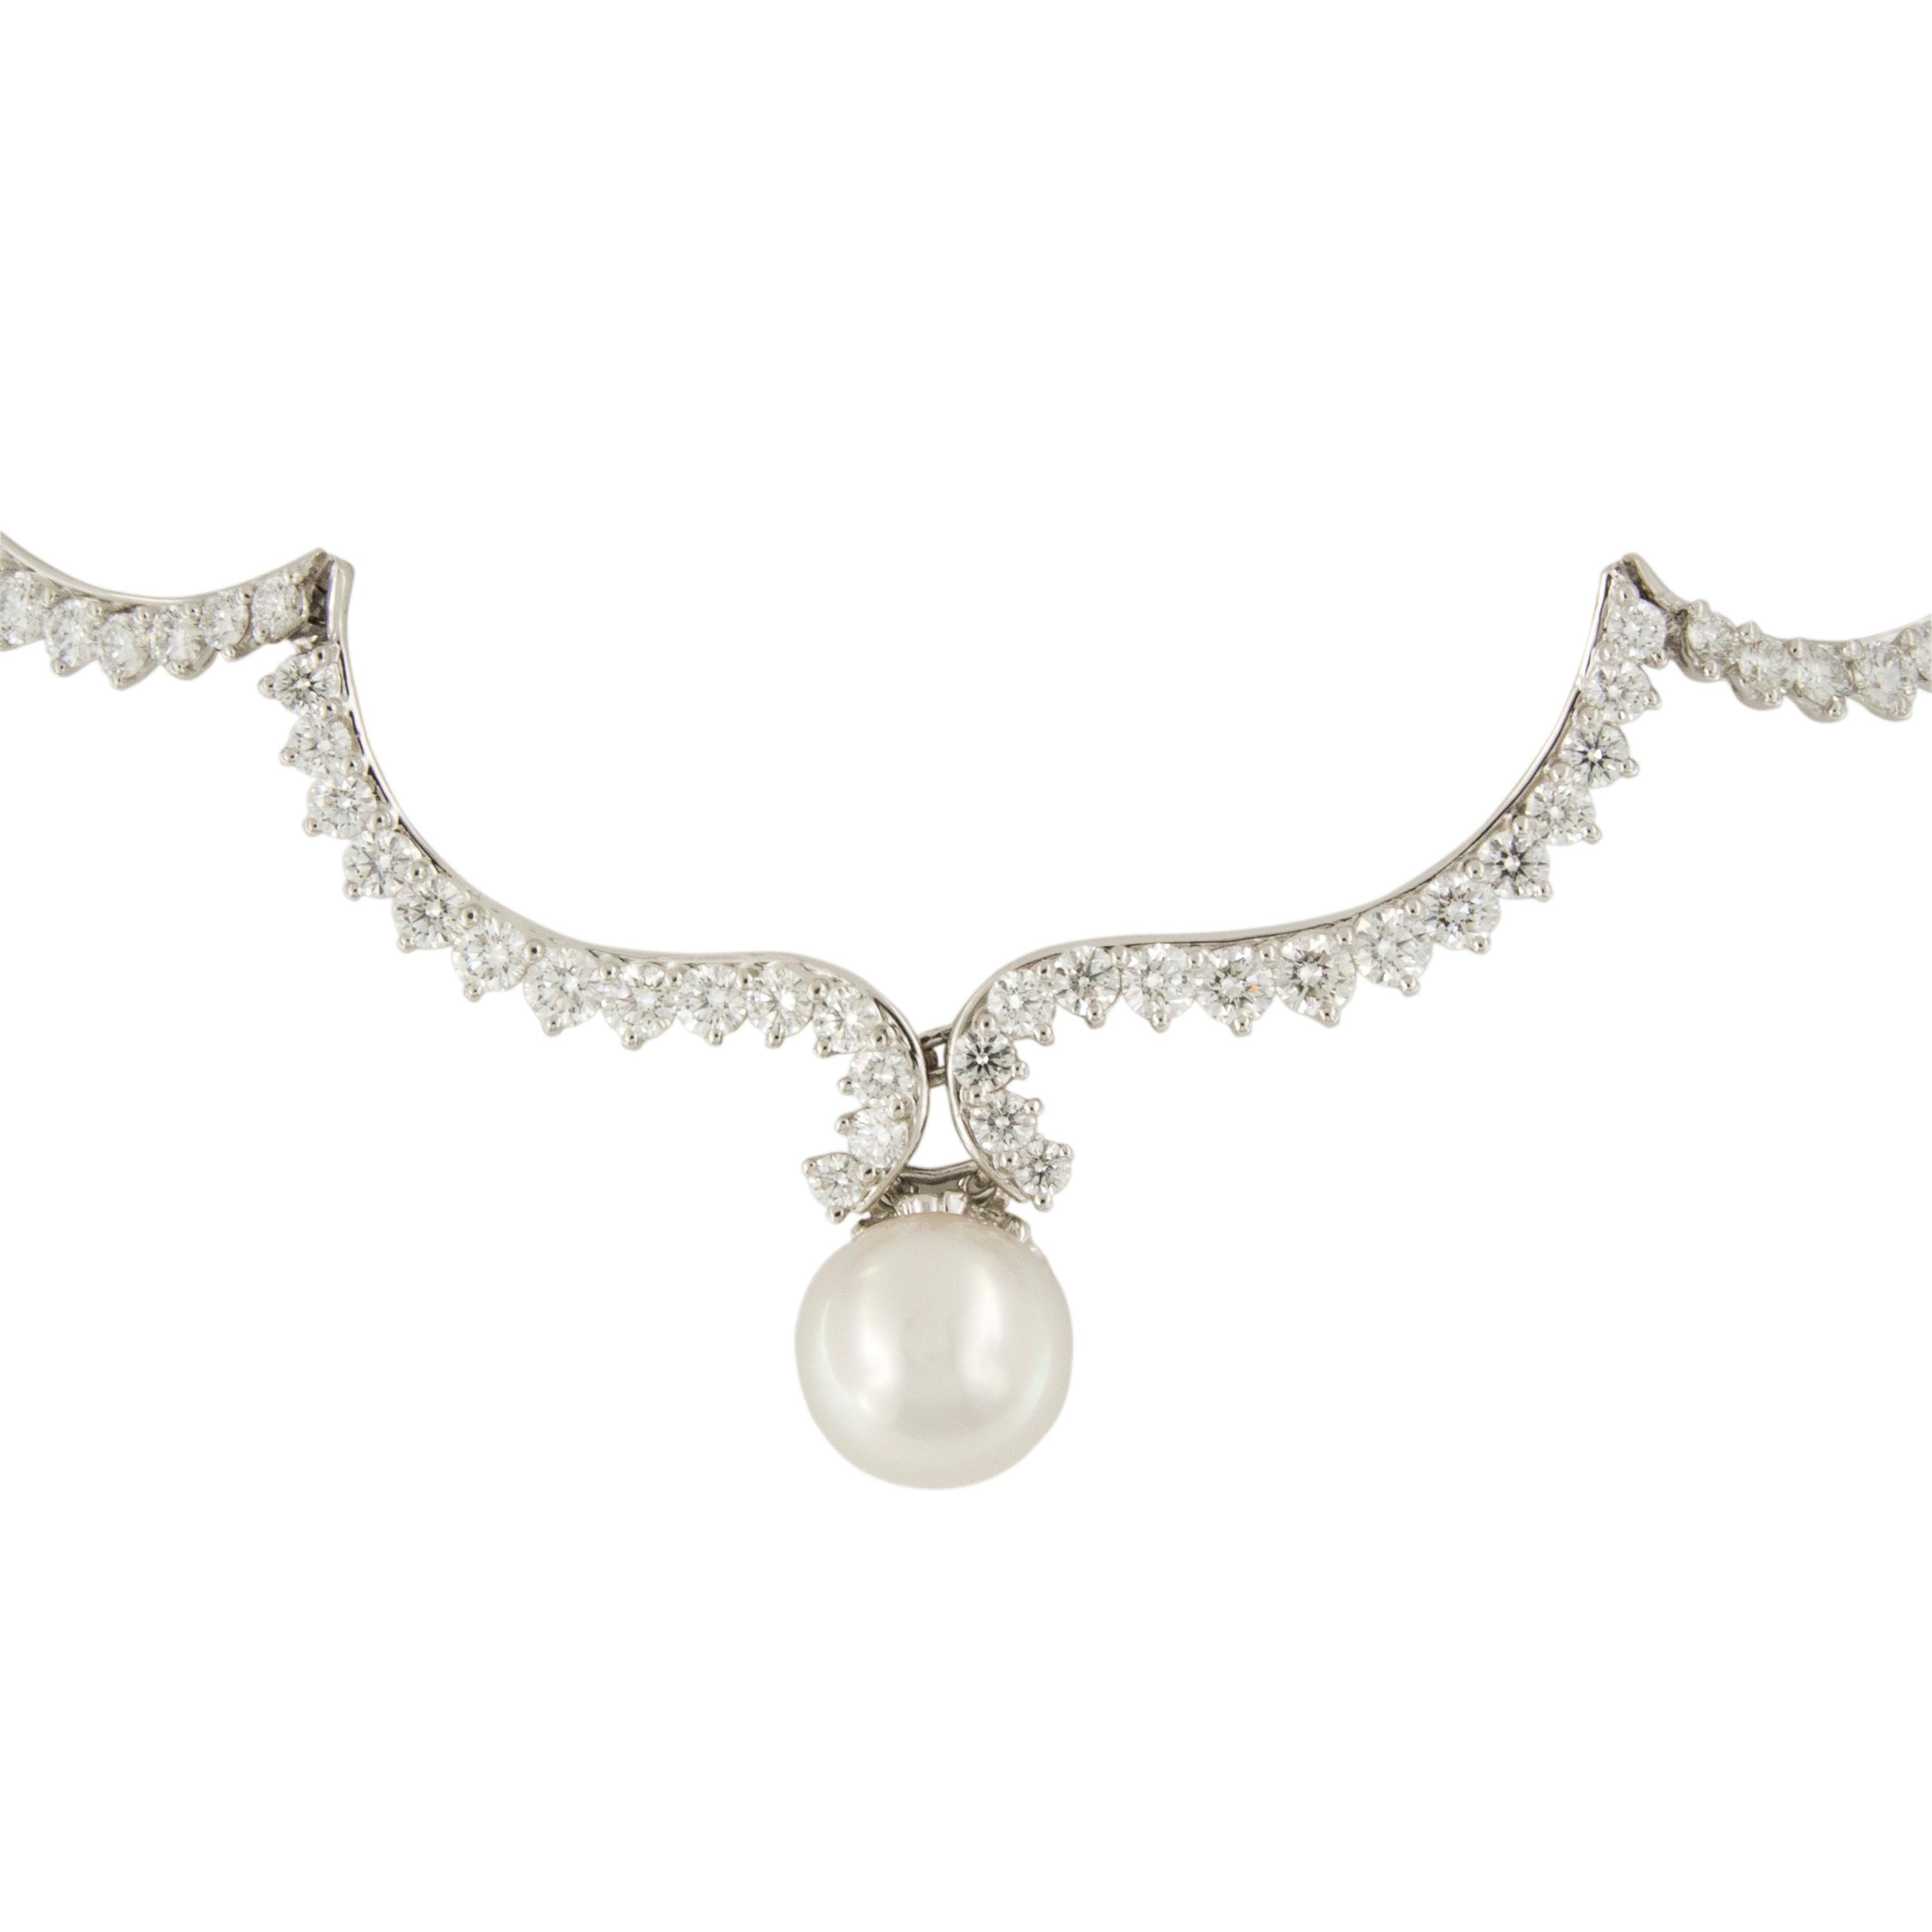 Assael is a name synonymous with the finest pearls of the world and Angela Cummings is renowned for her impeccable designs. Put them together in this one of a kind scalloped necklace made of noble platinum with 19.87 Cttw of the finest diamonds and